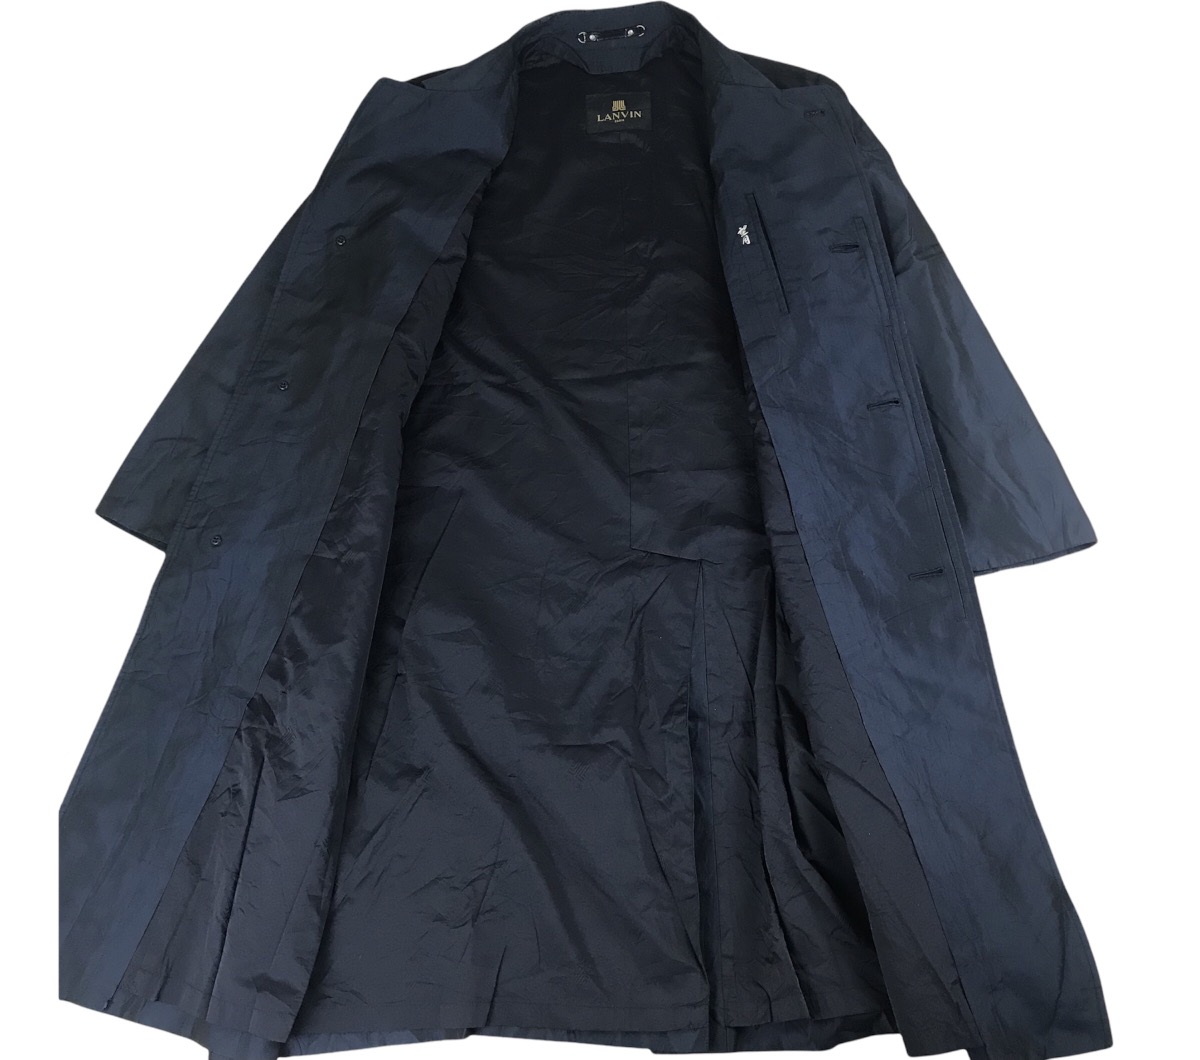 Vintage Lanvin Collection Trench Long Coat - 5